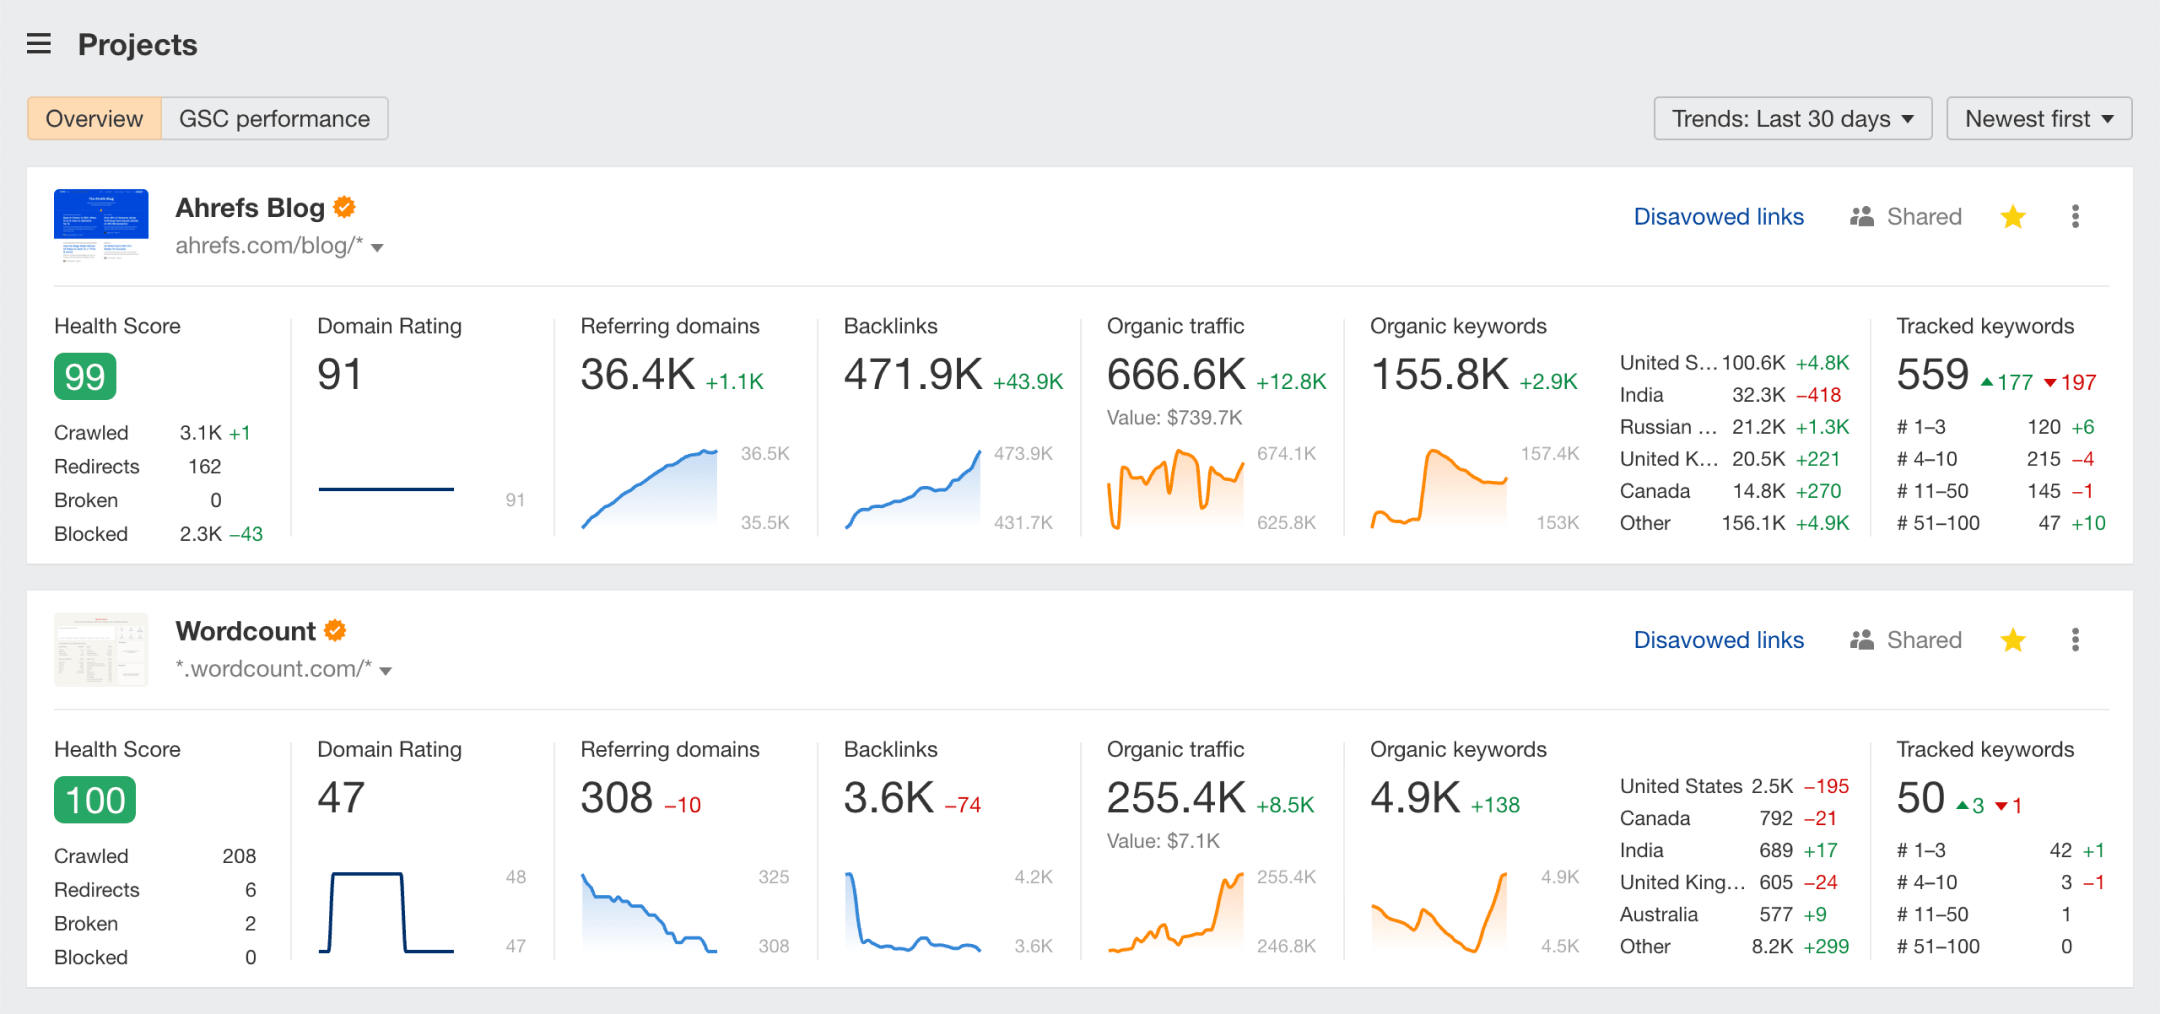 Dashboard: Projects overview